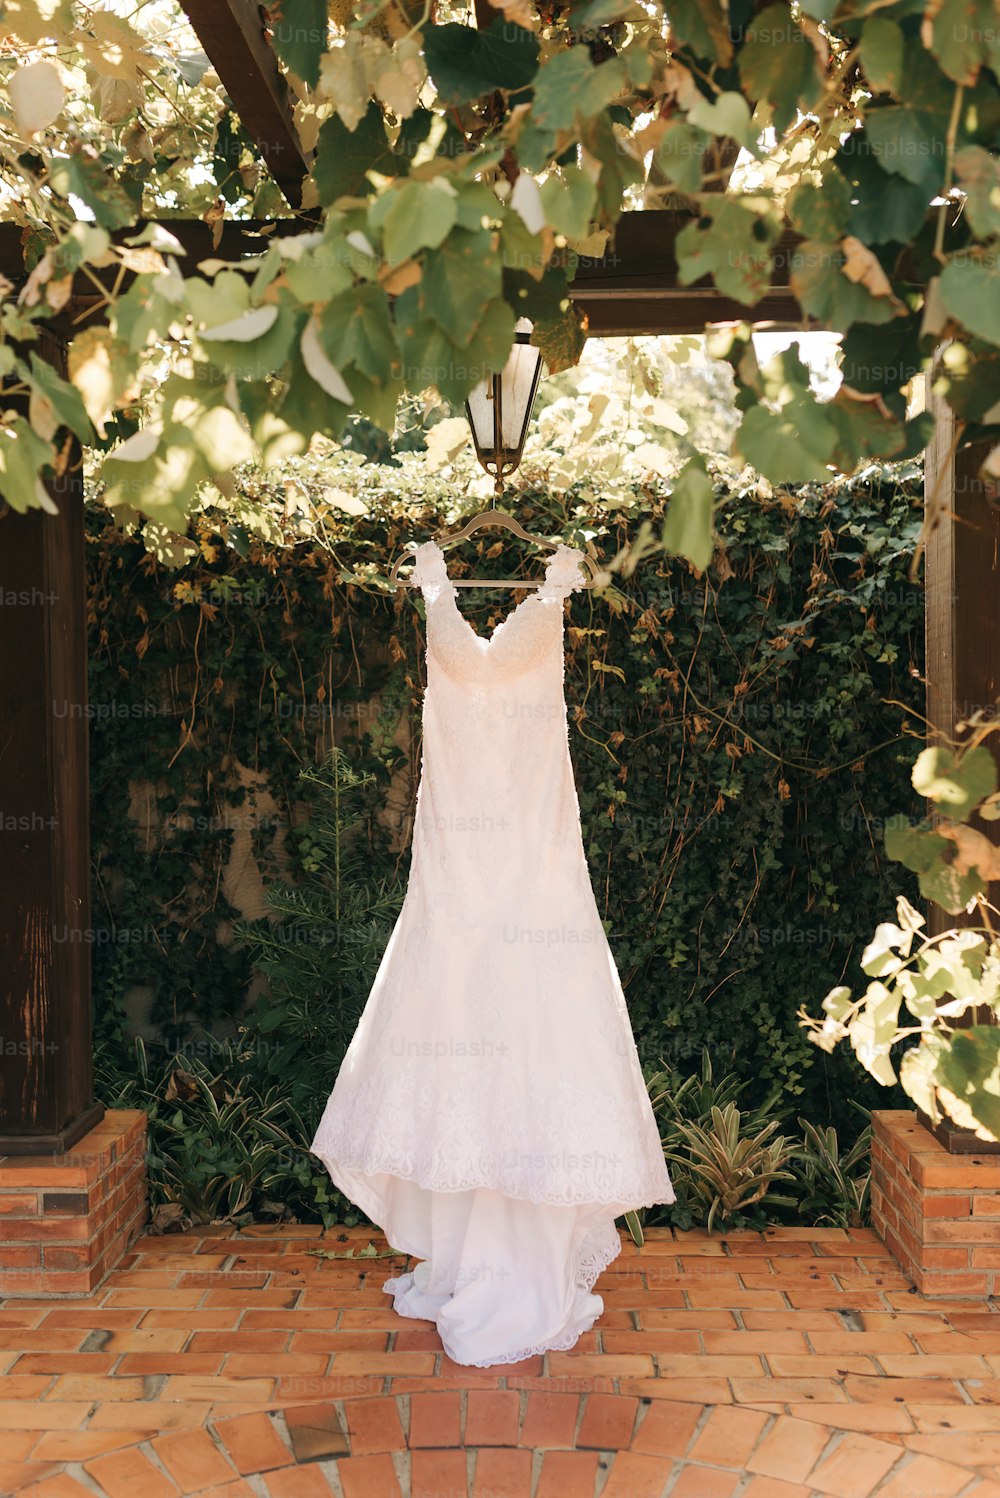 a wedding dress hanging on a clothes line